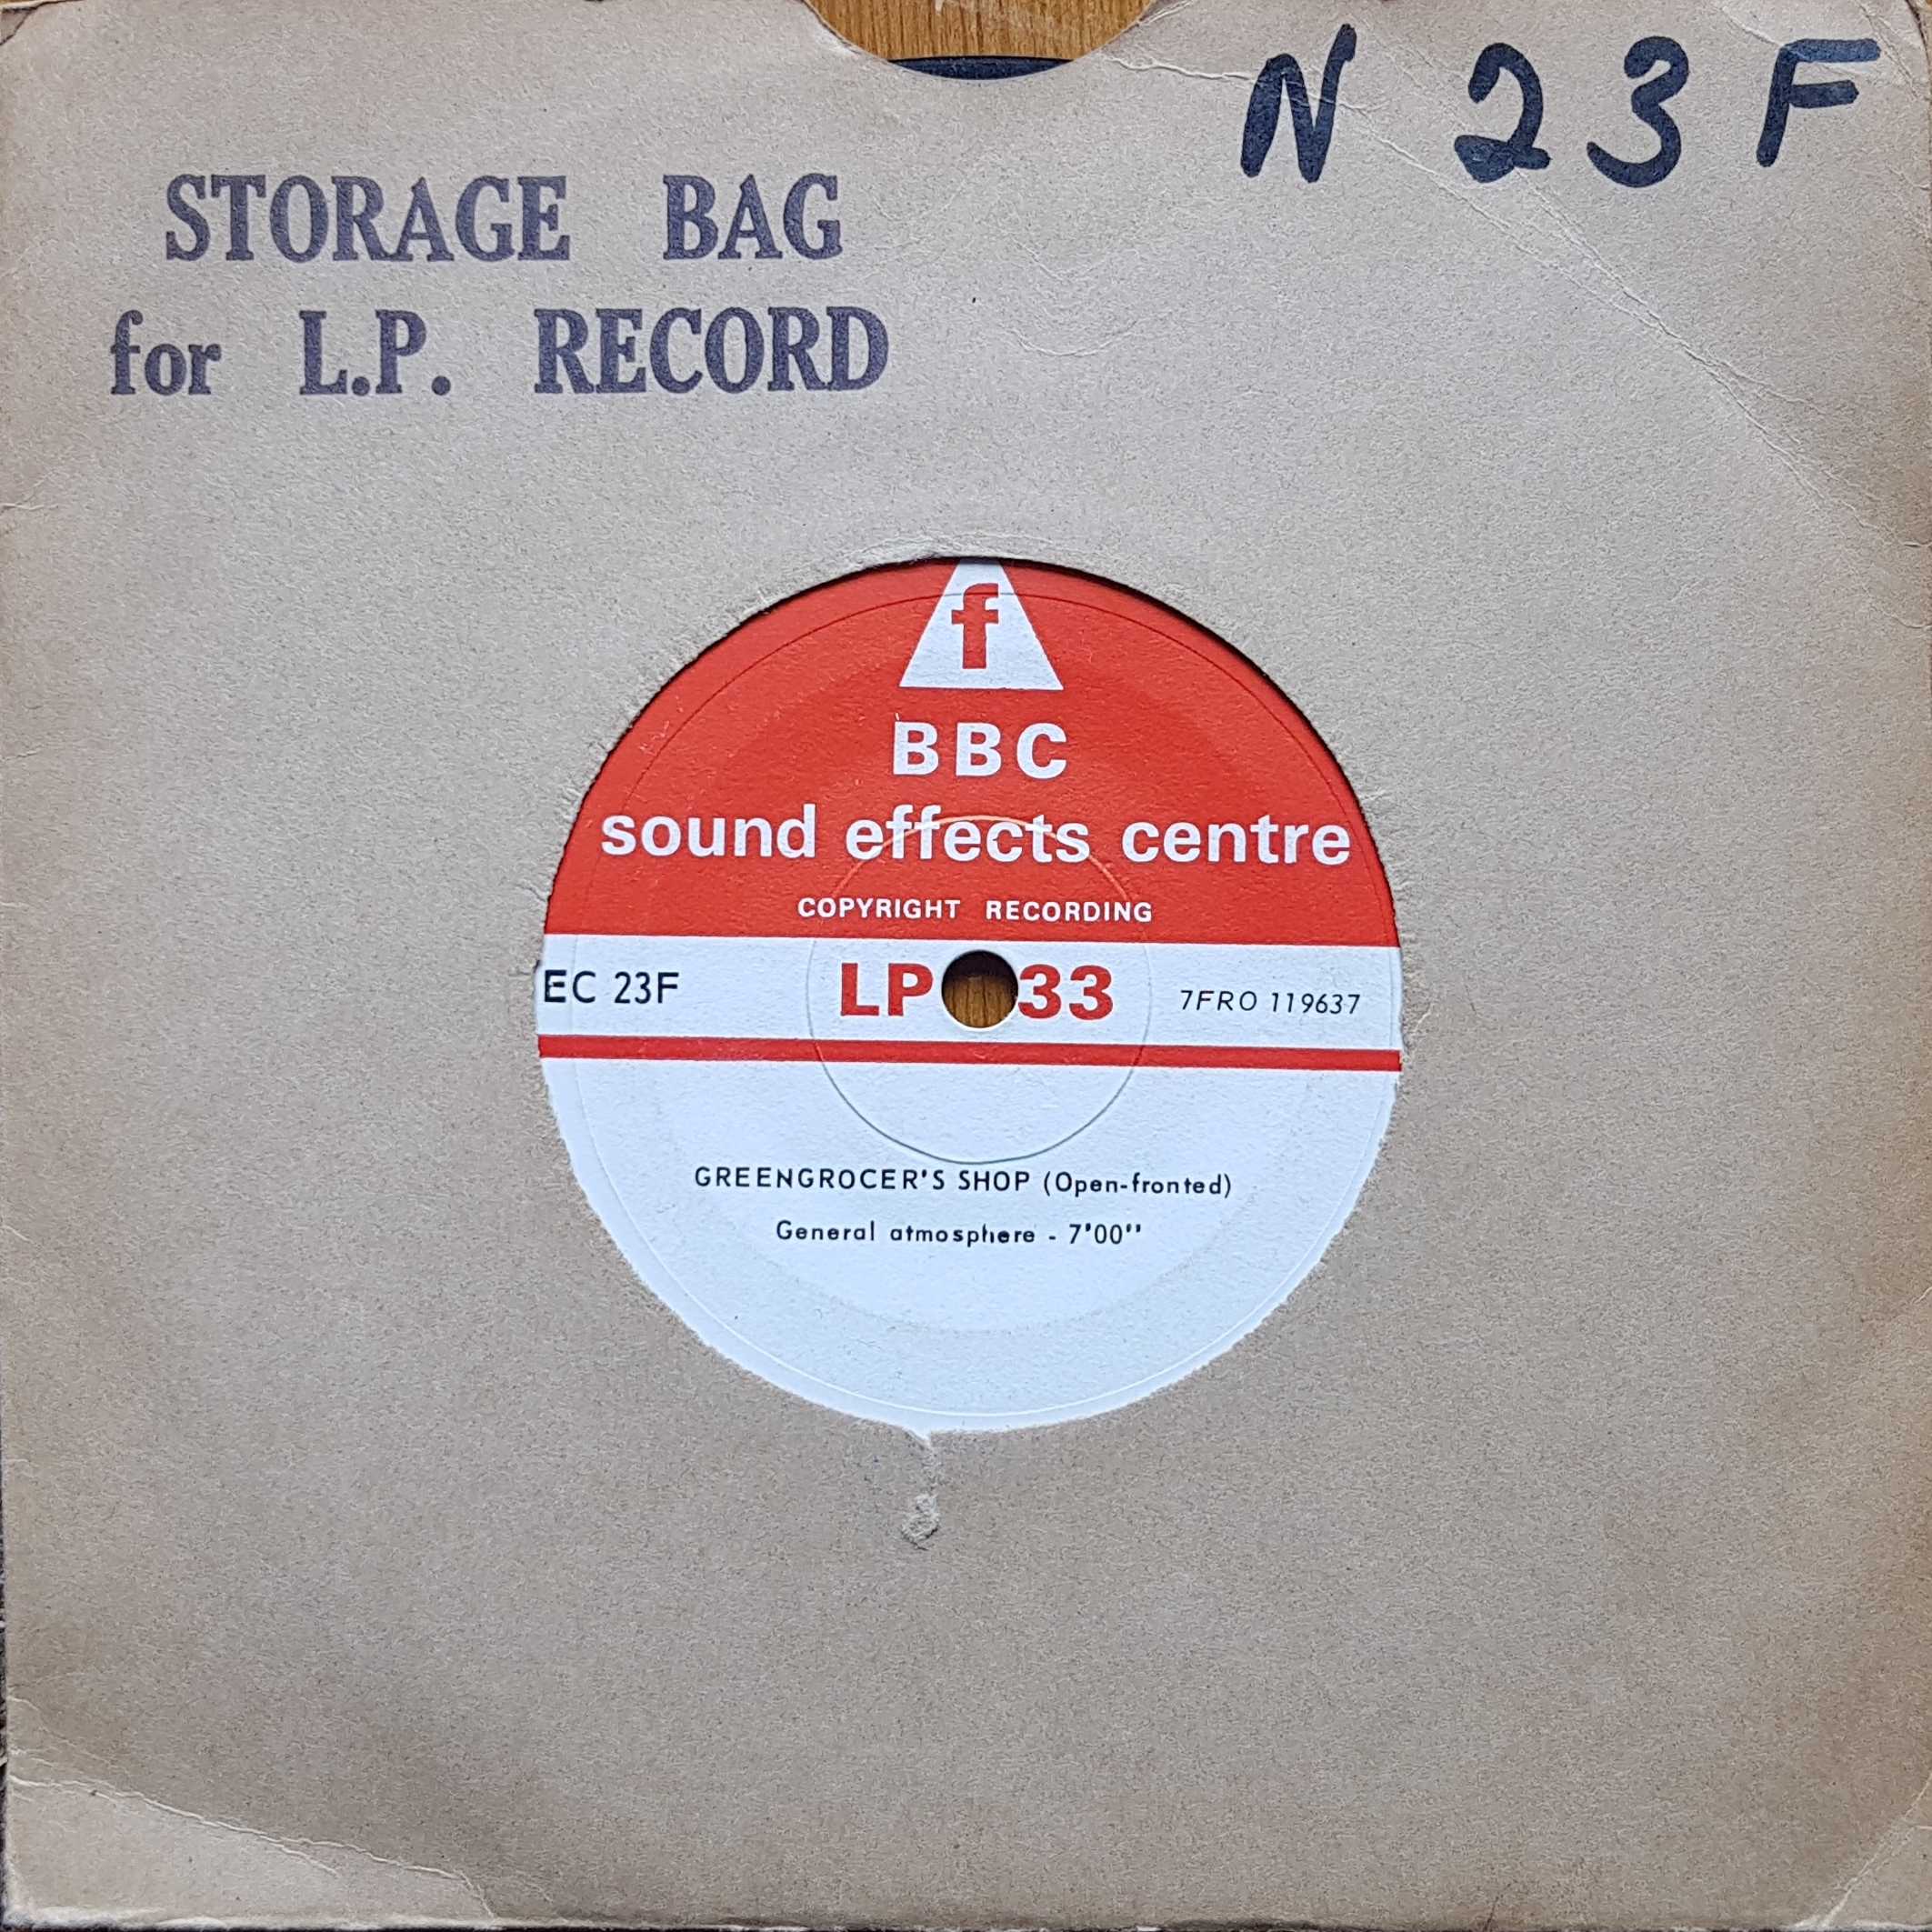 Picture of EC 23F Shops by artist Not registered from the BBC singles - Records and Tapes library